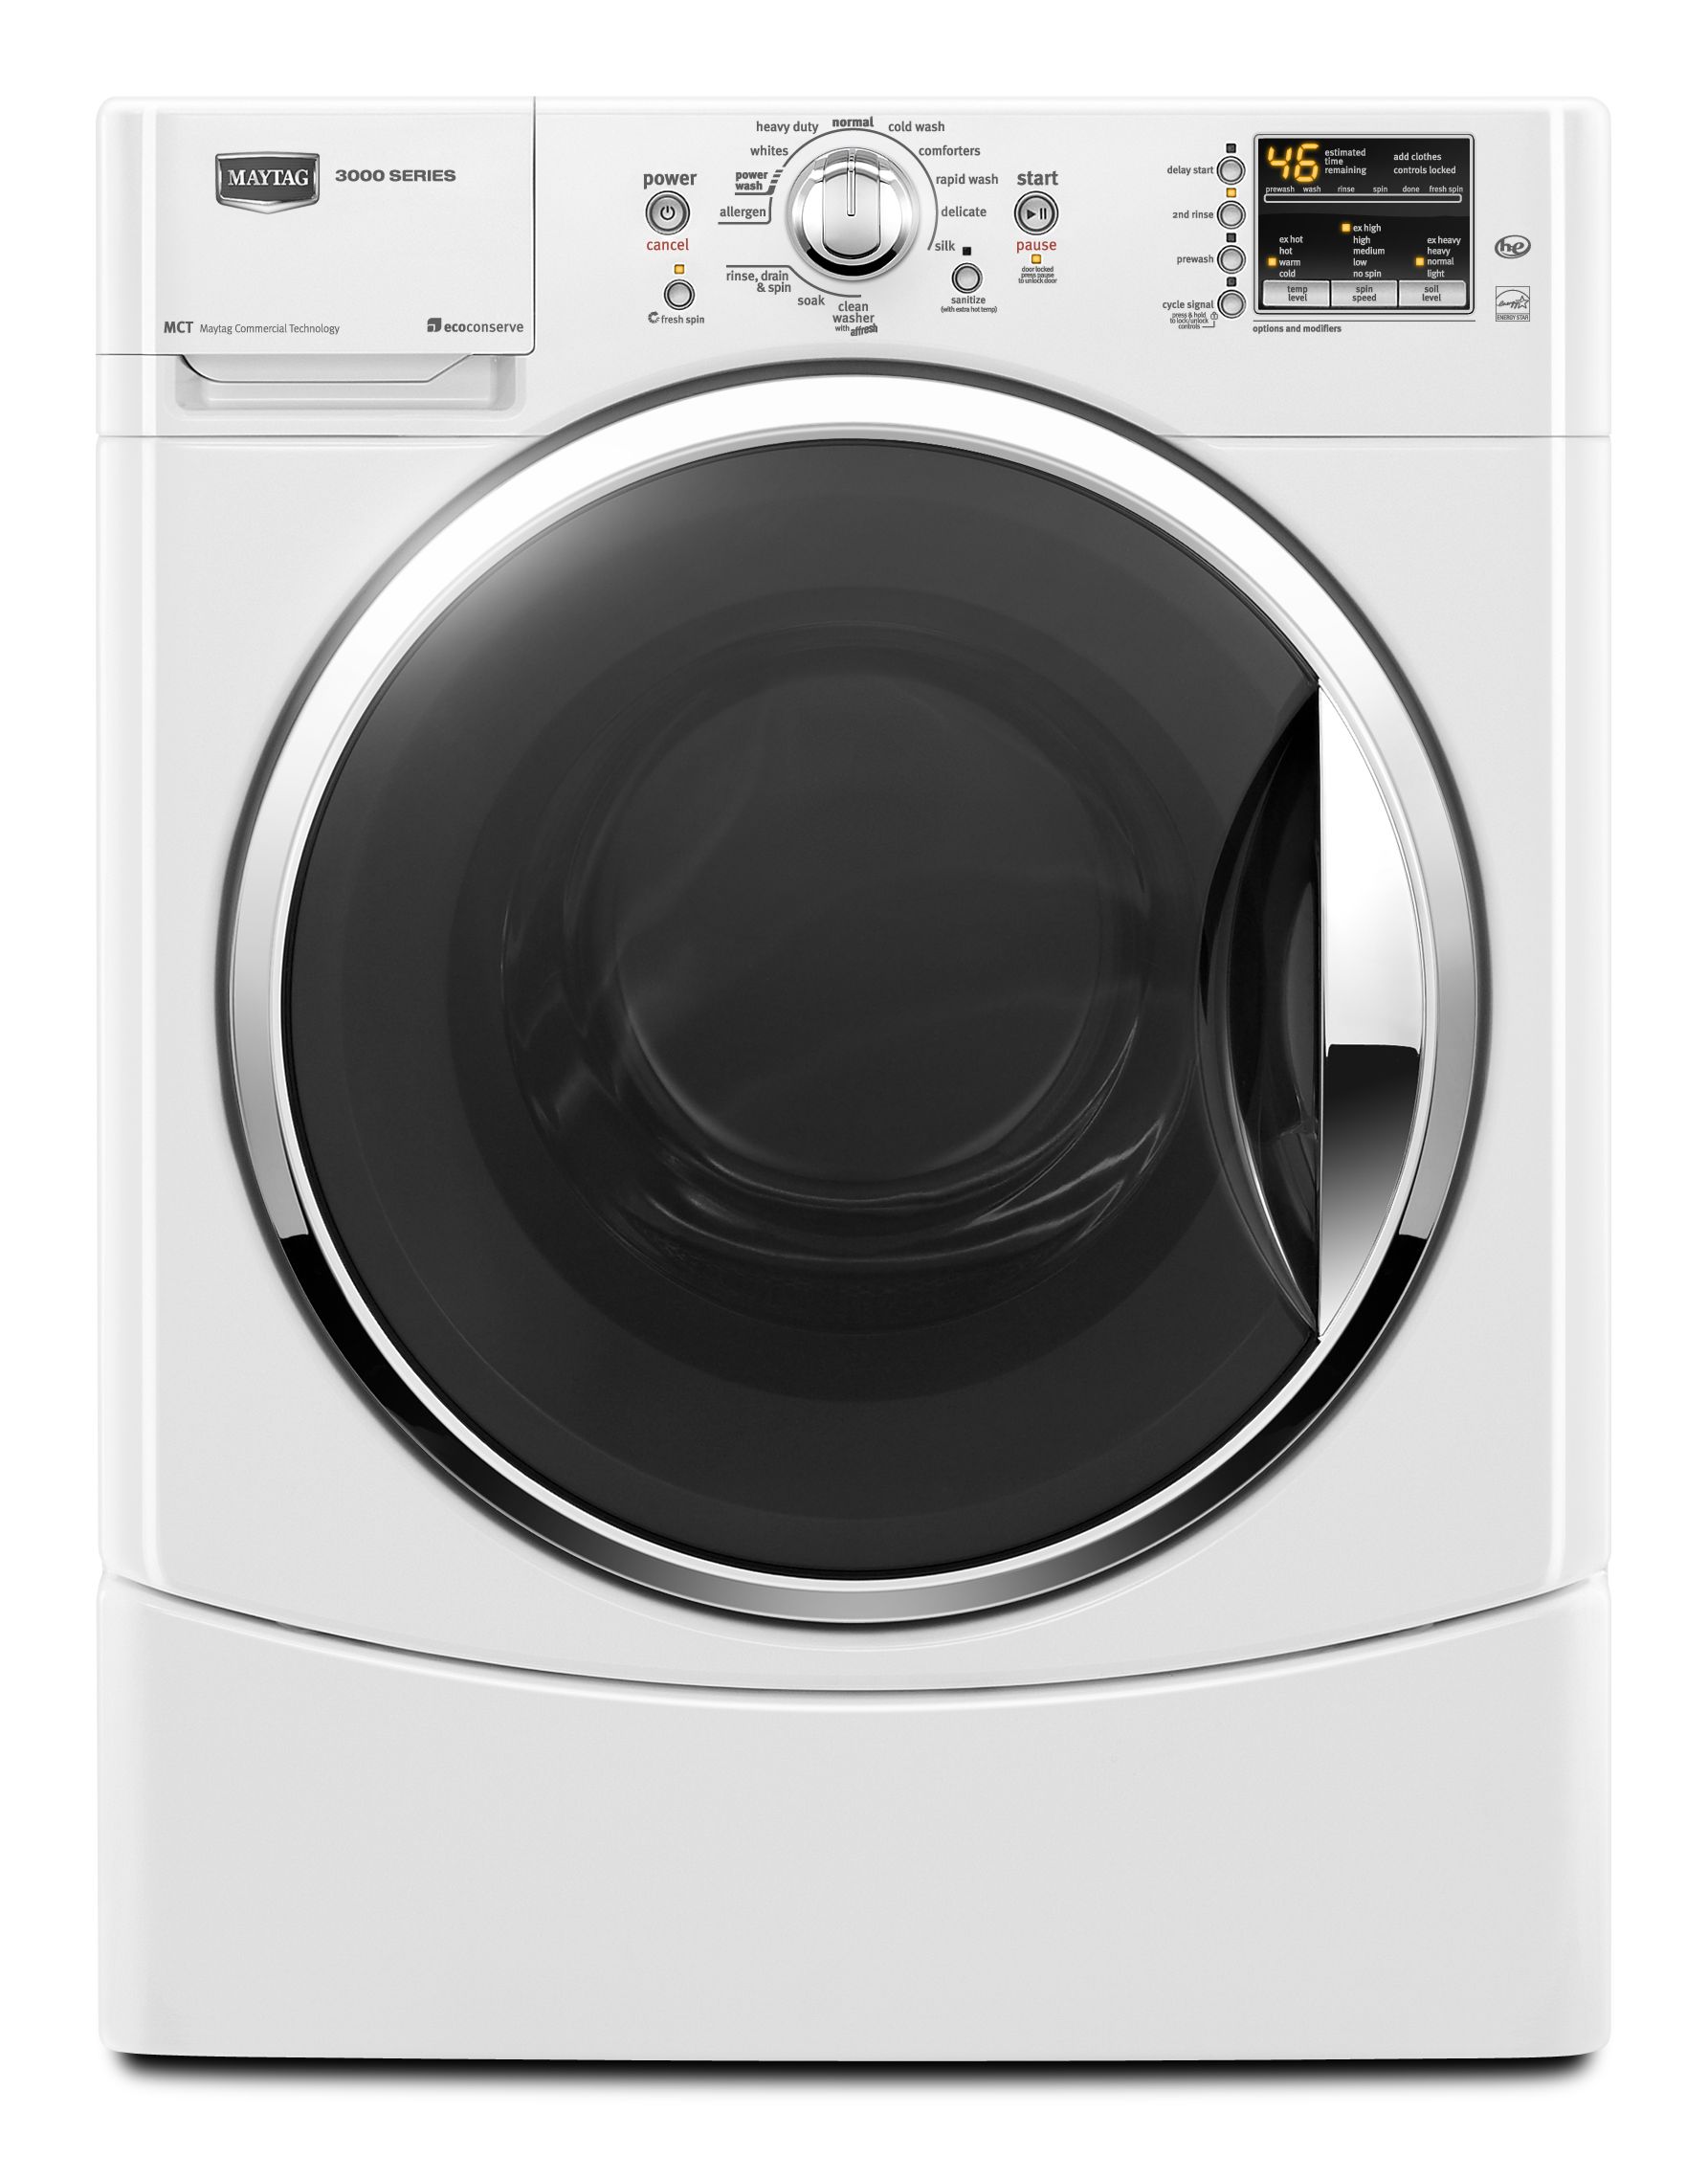 Whirlpool duet front-loading washing machine repair guide explains washing  machine parts testing, diagnostic tests, error codes, troubleshooting.